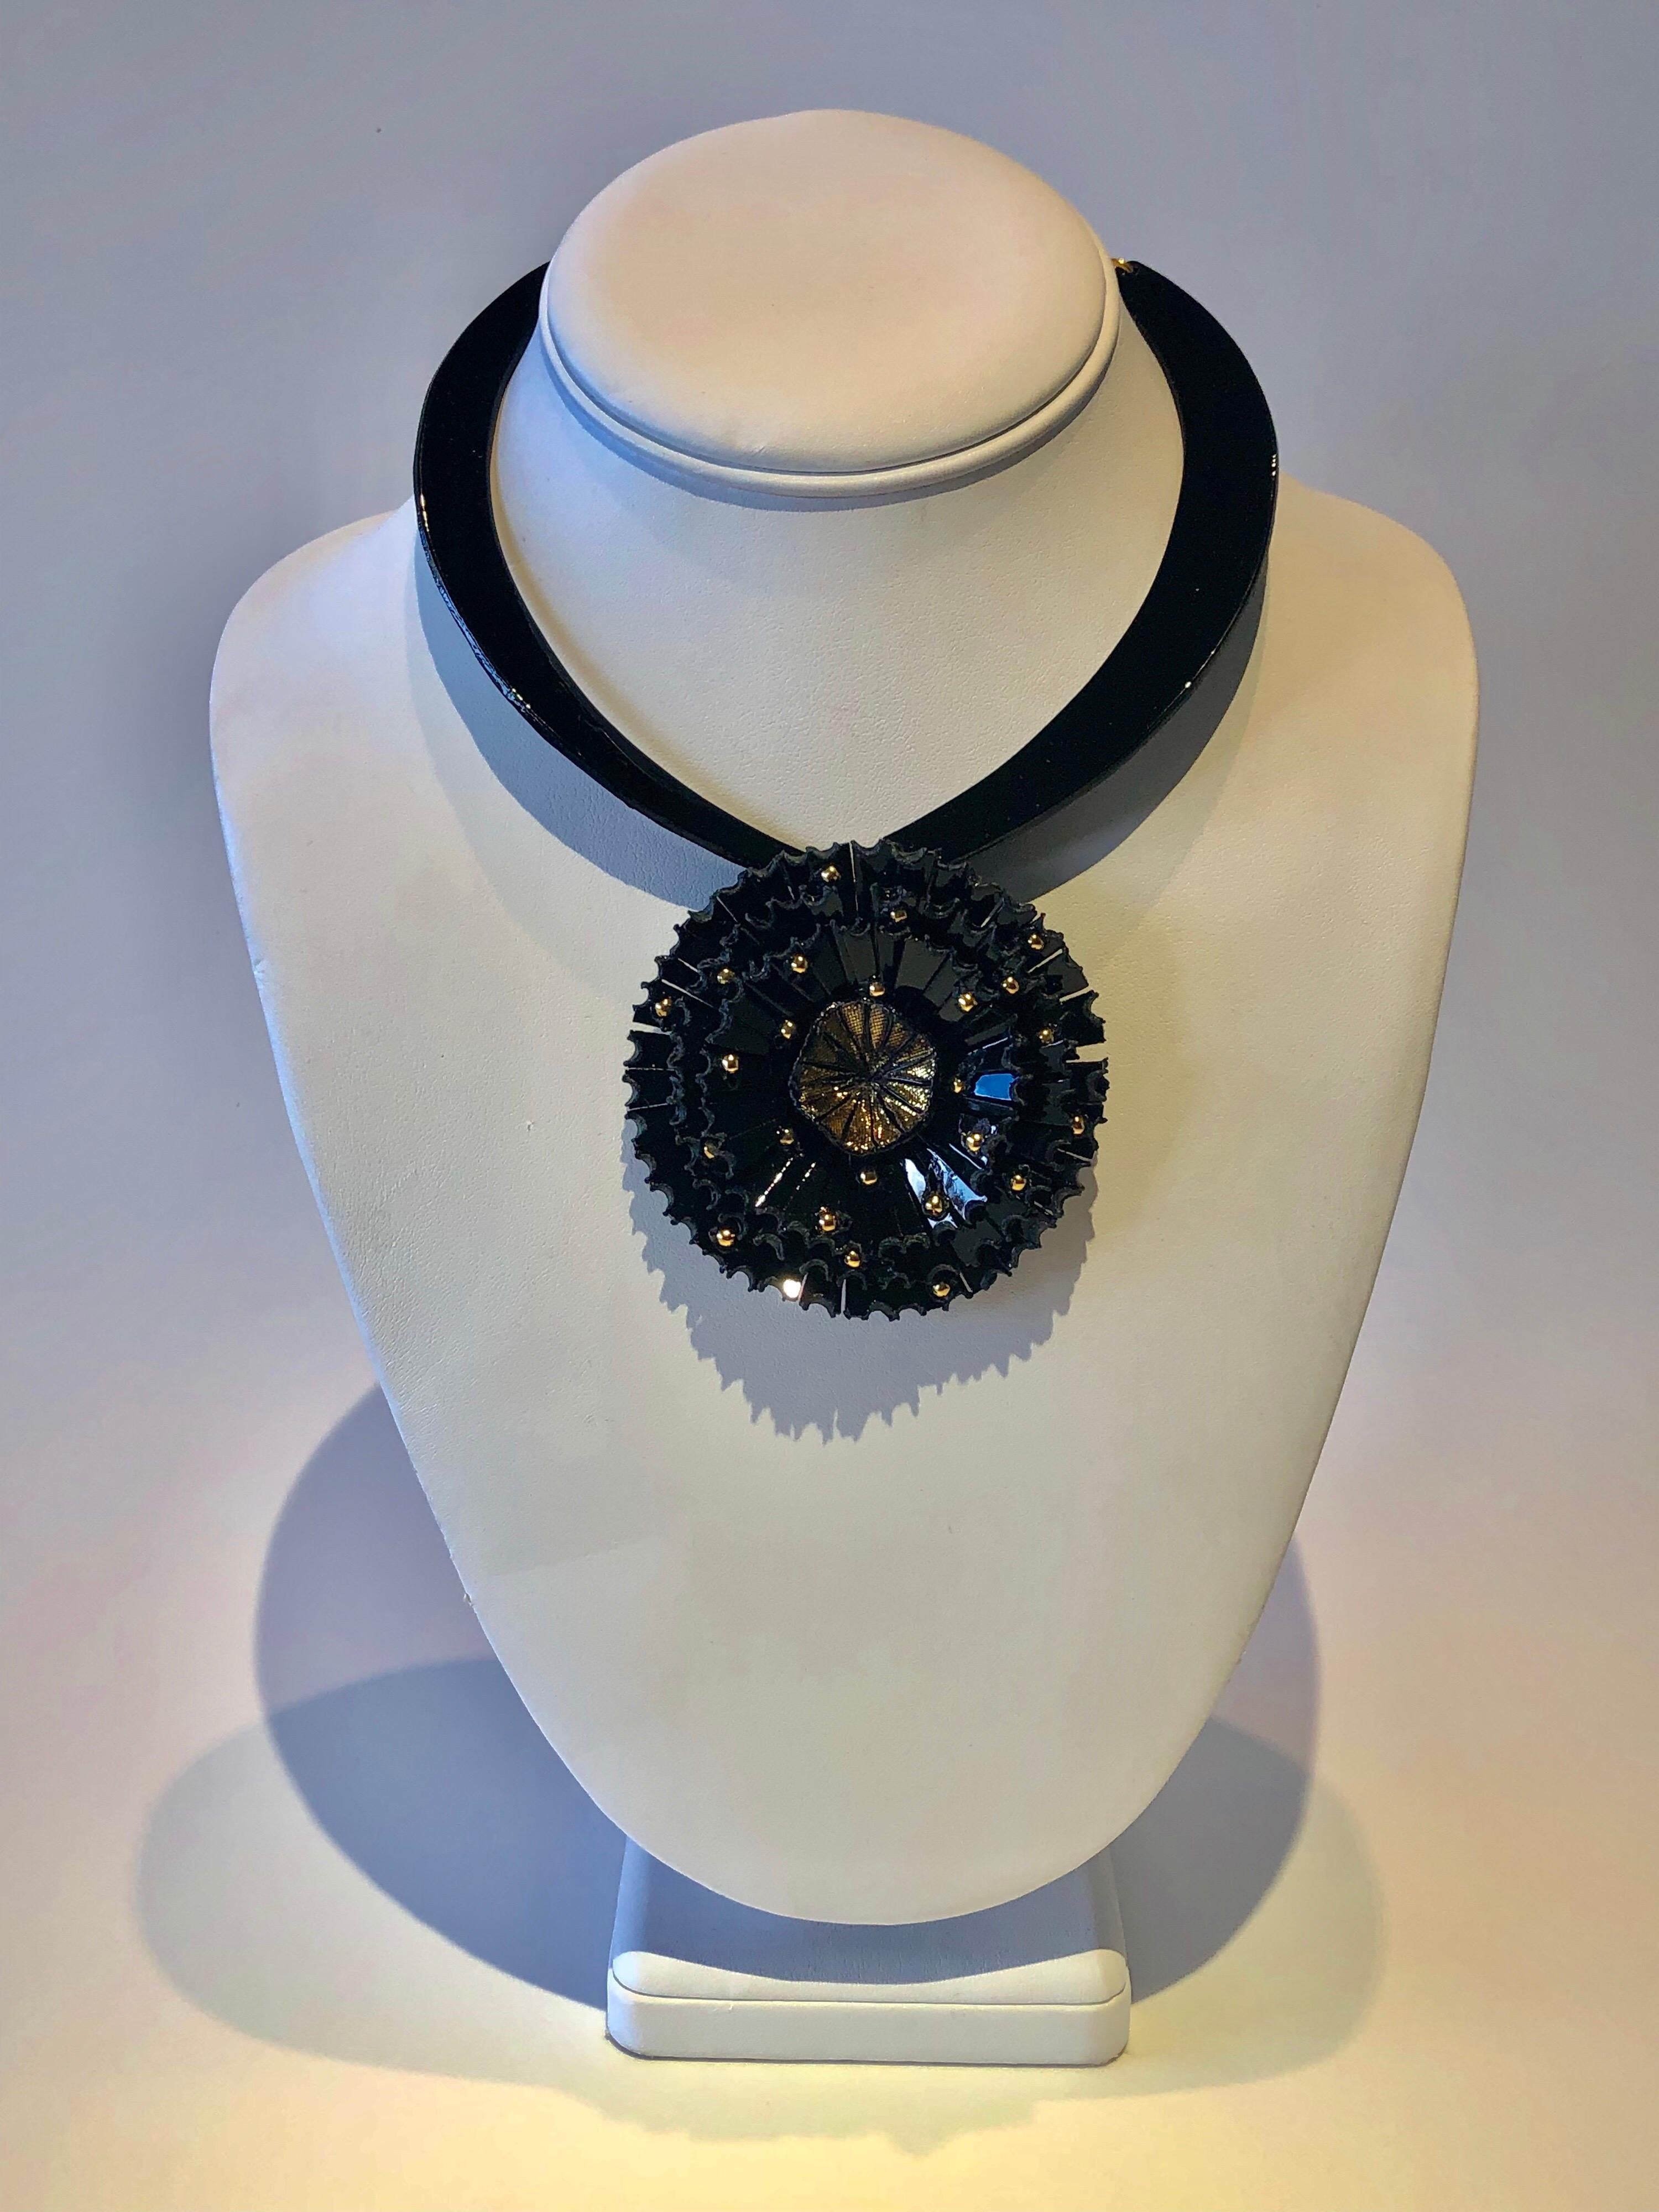 Light and easy to wear, this handmade artisanal contemporary statement necklace was made in Paris by Cilea. The lightweight necklace/collier features a giant architectural flower, comprised out of black enamel and resin. The slowers